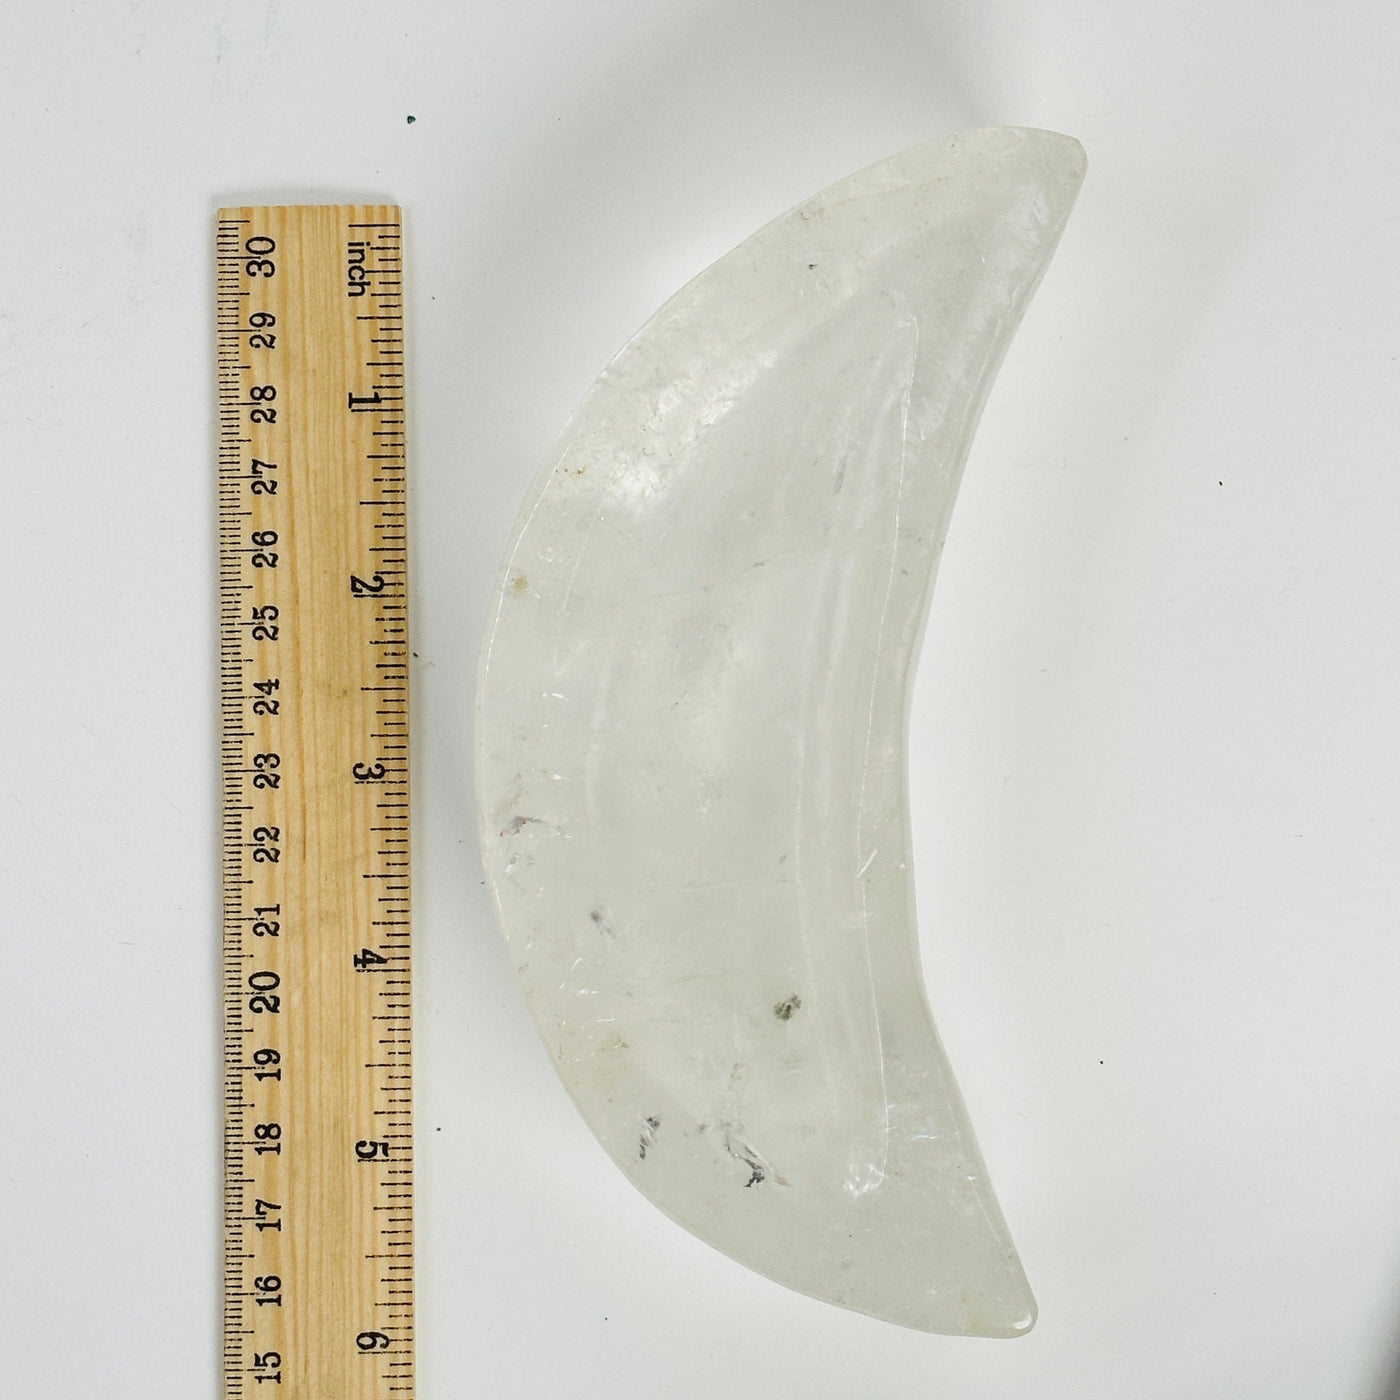 crystal quartz moon bowl next to a ruler for size reference